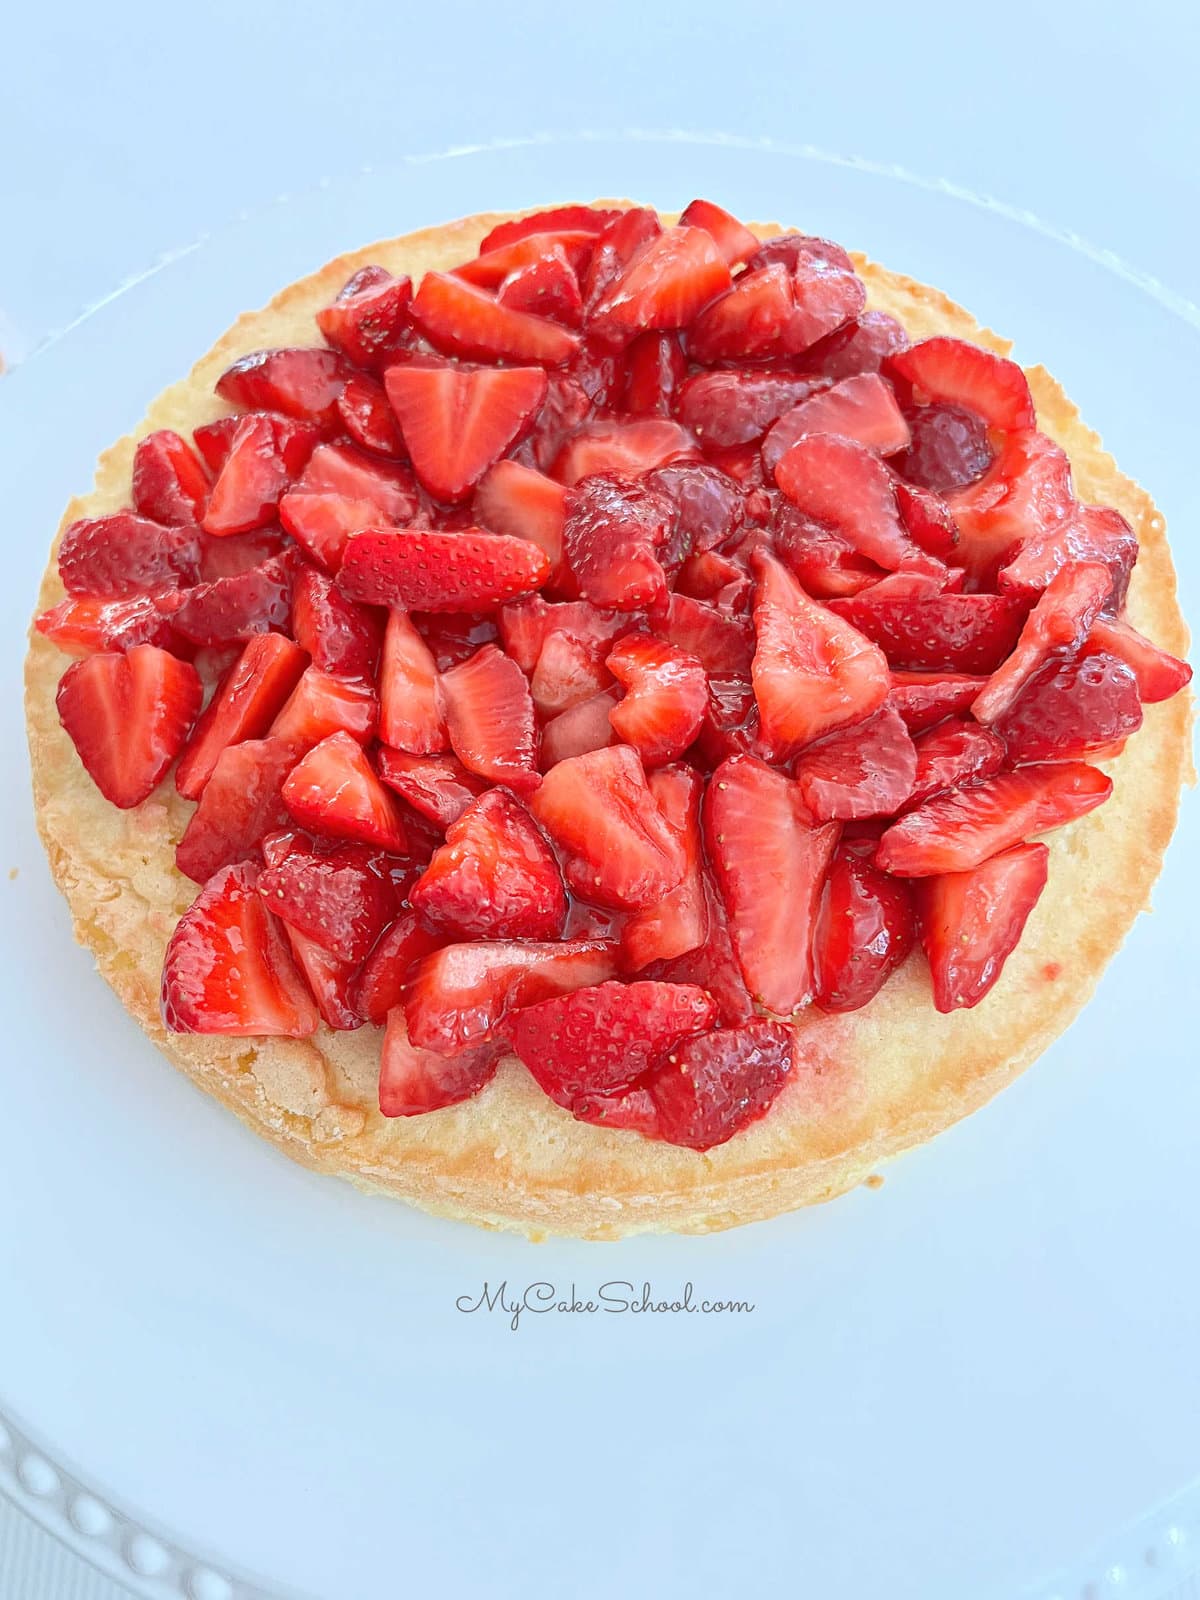 Pound cake layer topped with sliced strawberries